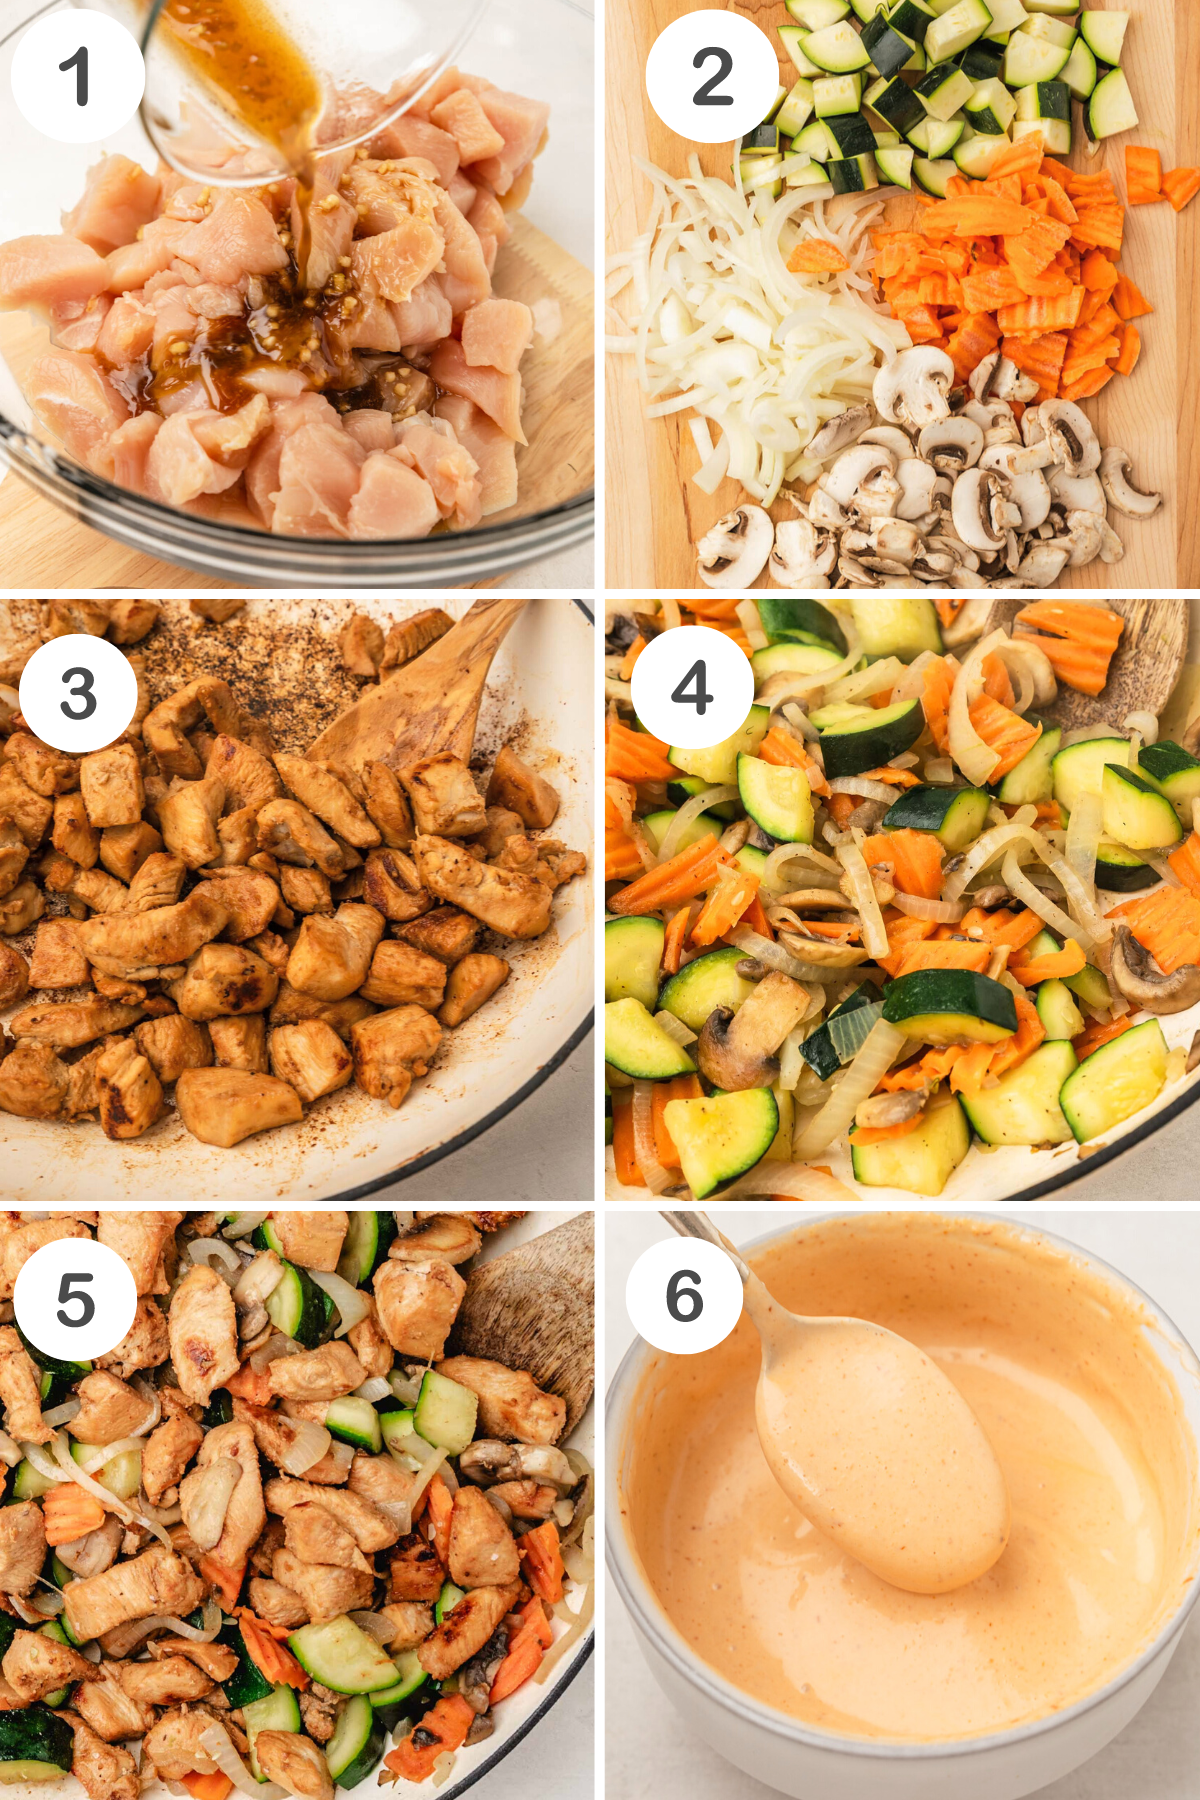 numbered step by step photos showing how to make hibachi at home. 